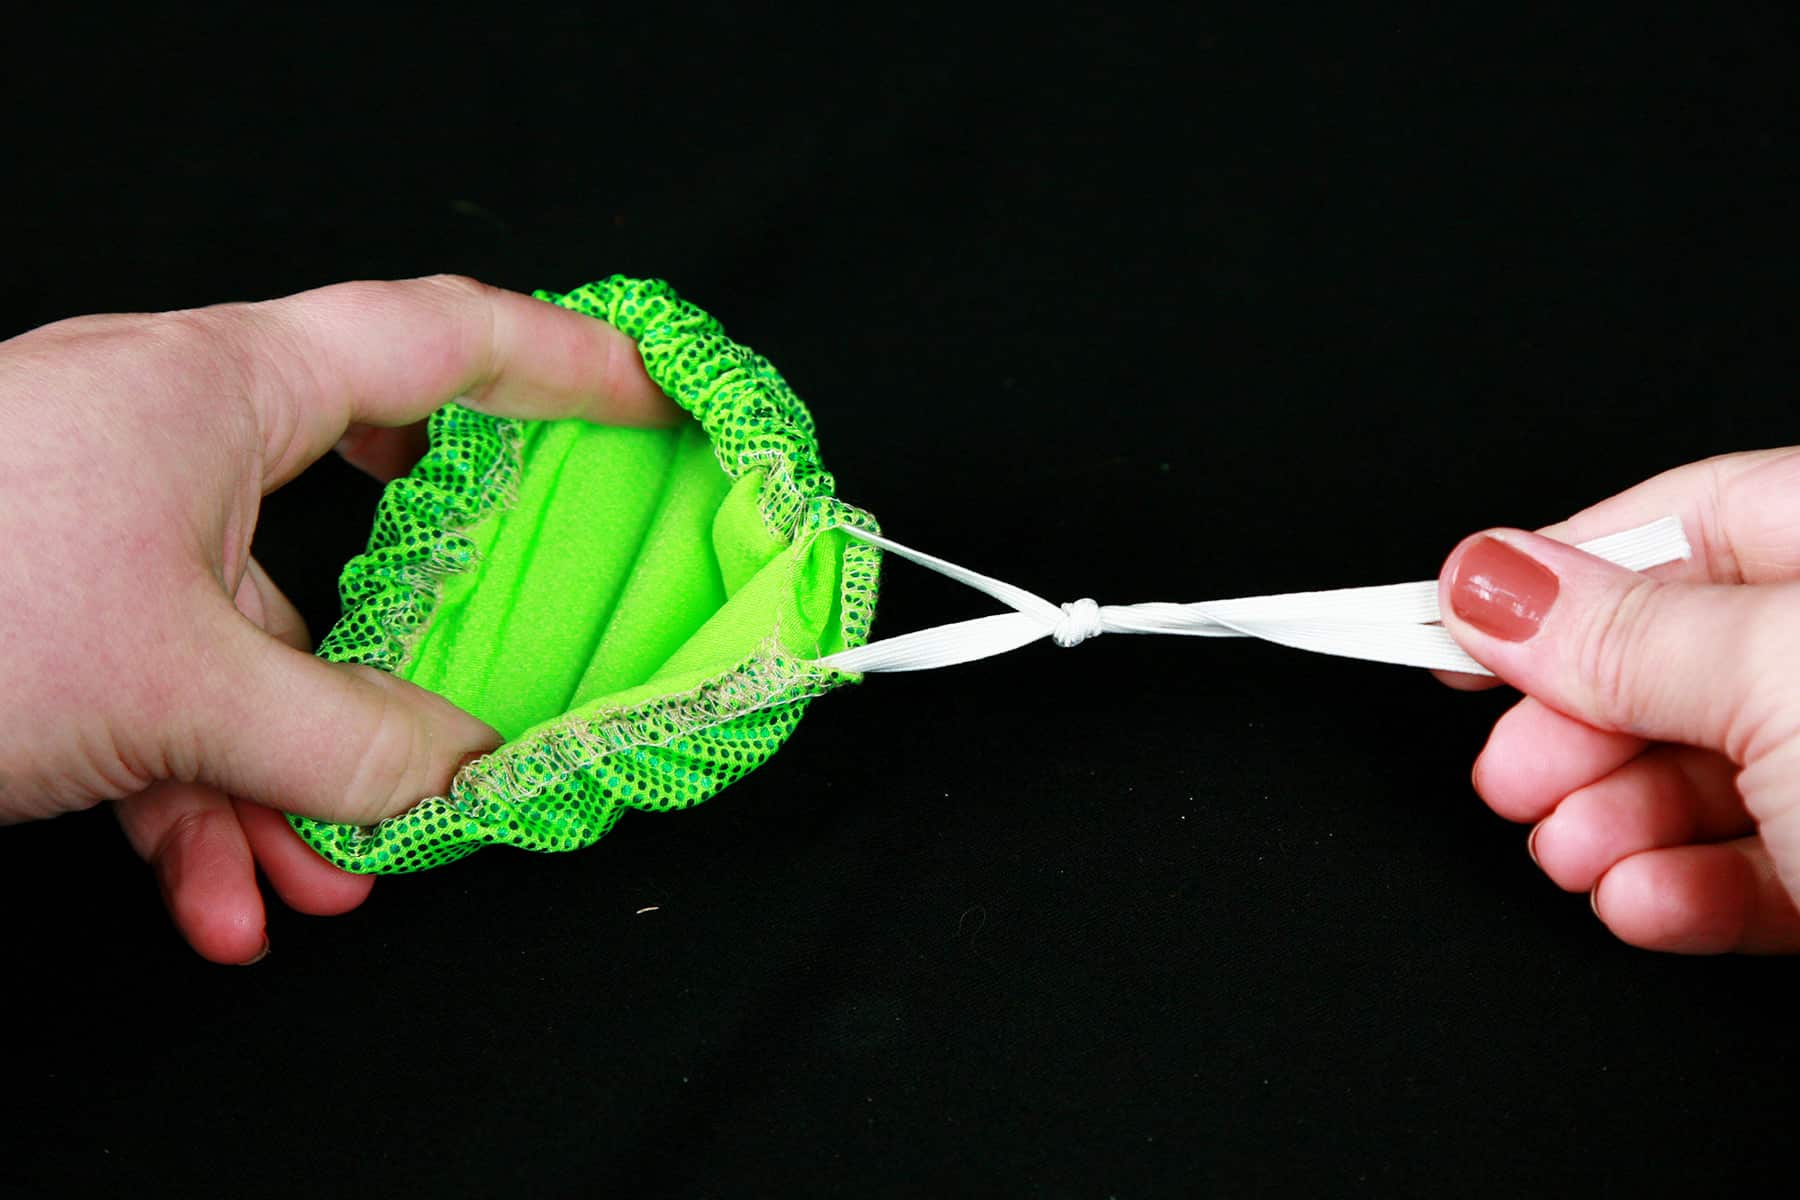 A length of elastic being tied off, per the instructions.